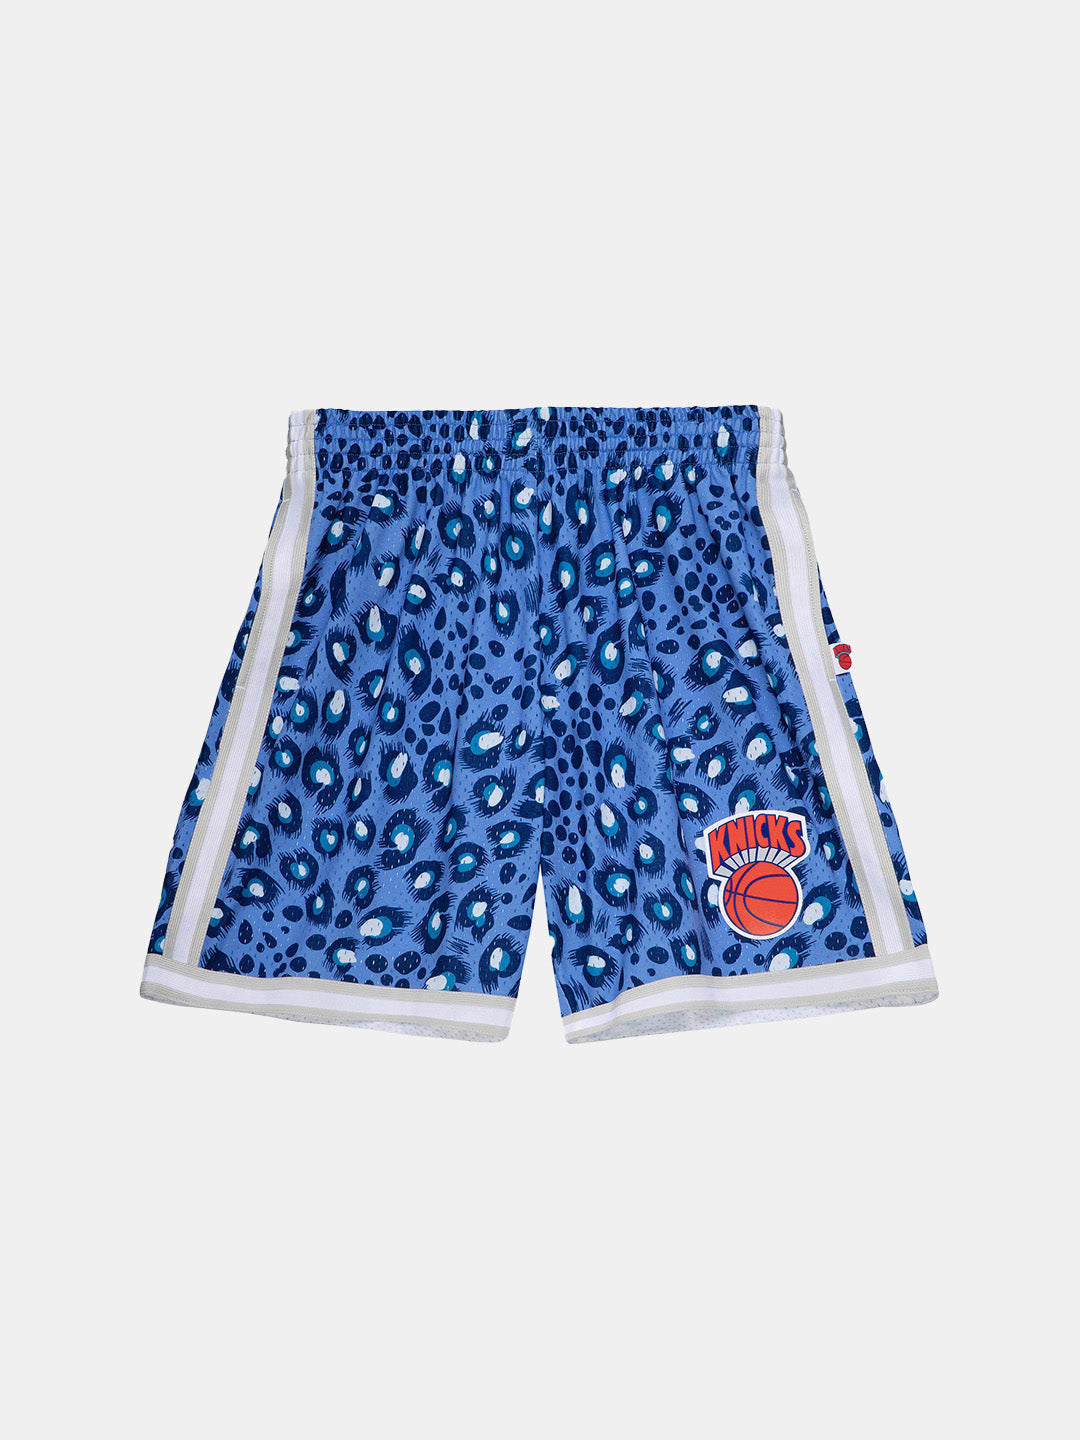 UNINTERRUPTED X Mitchell & Ness Legends Shorts Knicks - front view of the shorts with animal print pattern and knicks logo